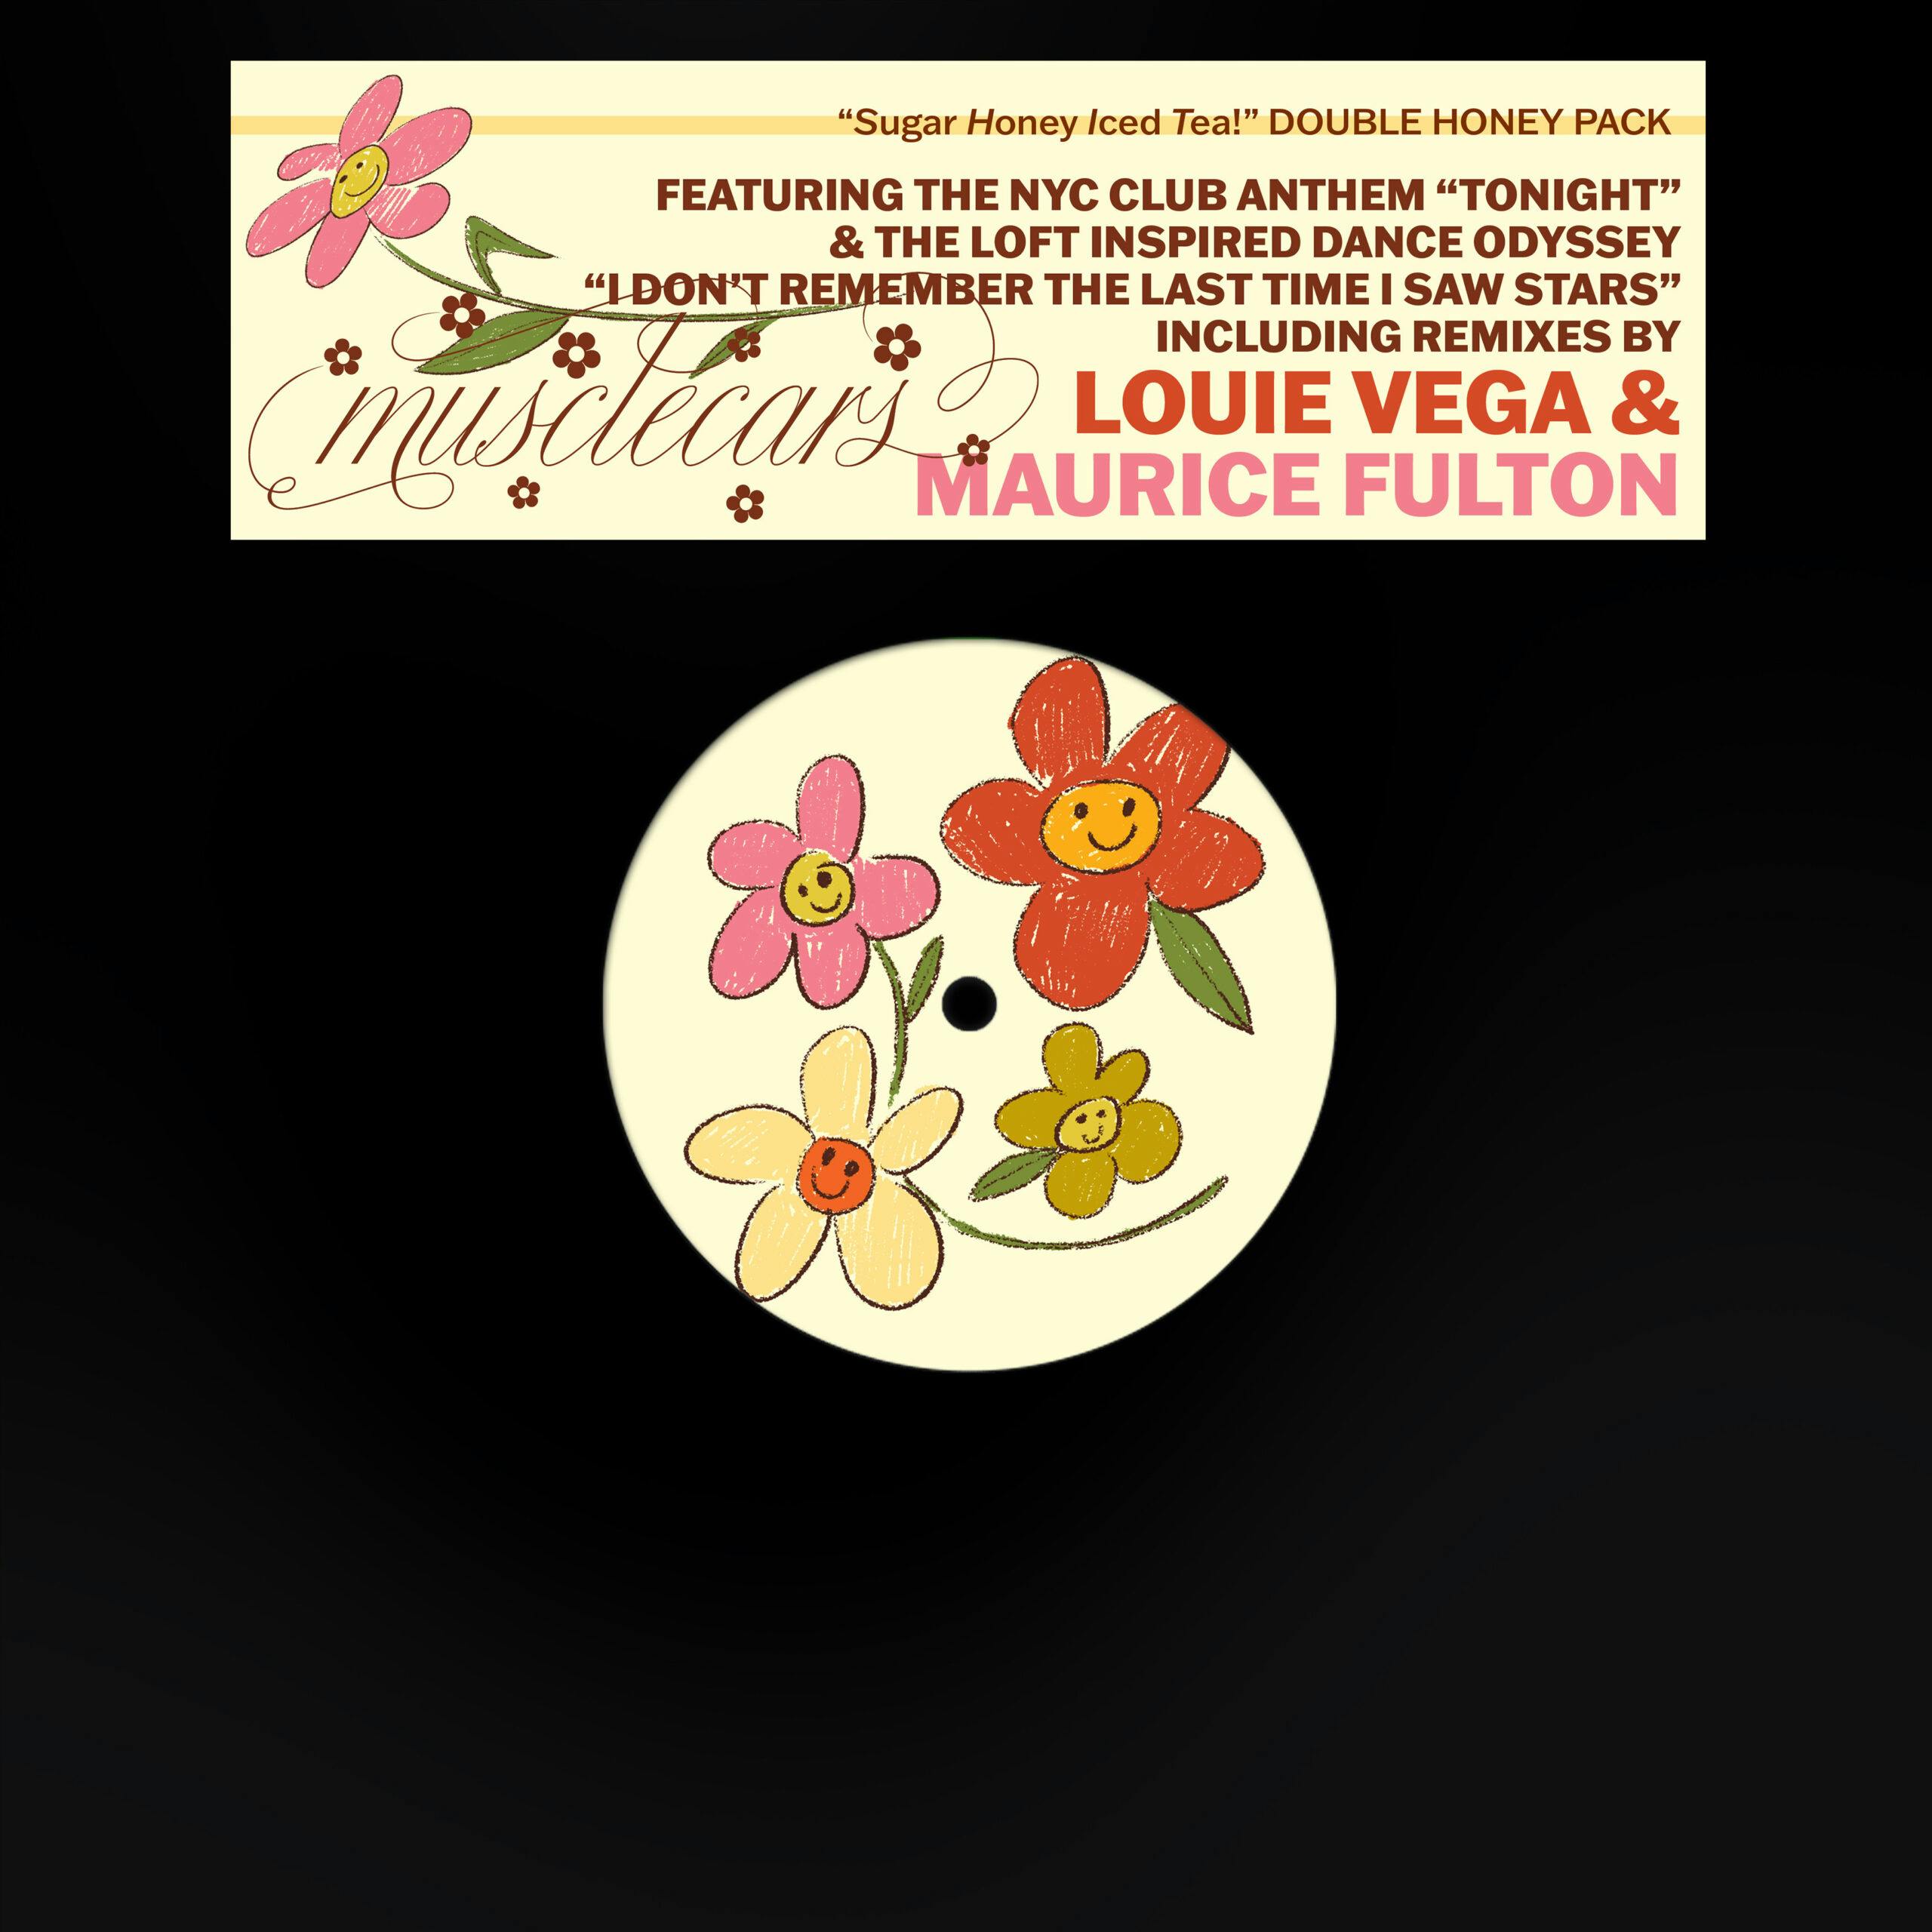 After the highly anticipated debut album "Sugar Honey Iced Tea!," the dynamic NYC duo strikes once more with a double pack of alternate versions and remixes. Craig Handfield and Brandon Weems, better known as musclecars, have unveiled a dance music masterpiece, now graced by the touch of house music legends Louie Vega and Maurice Fulton.